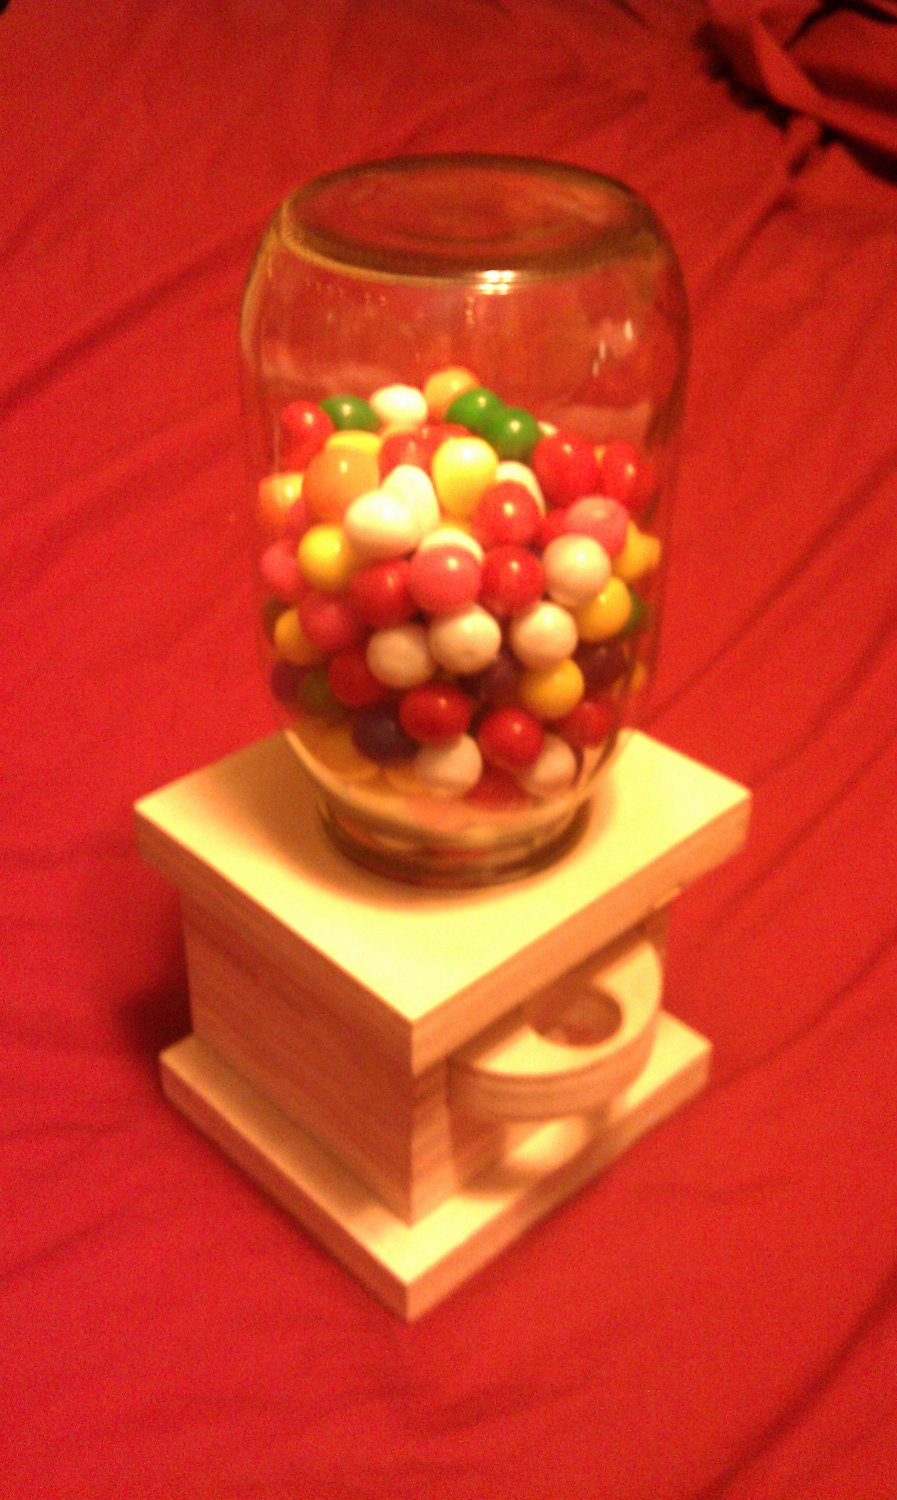 Items similar to On Sale Now - Wooden Gumball Machine on Etsy